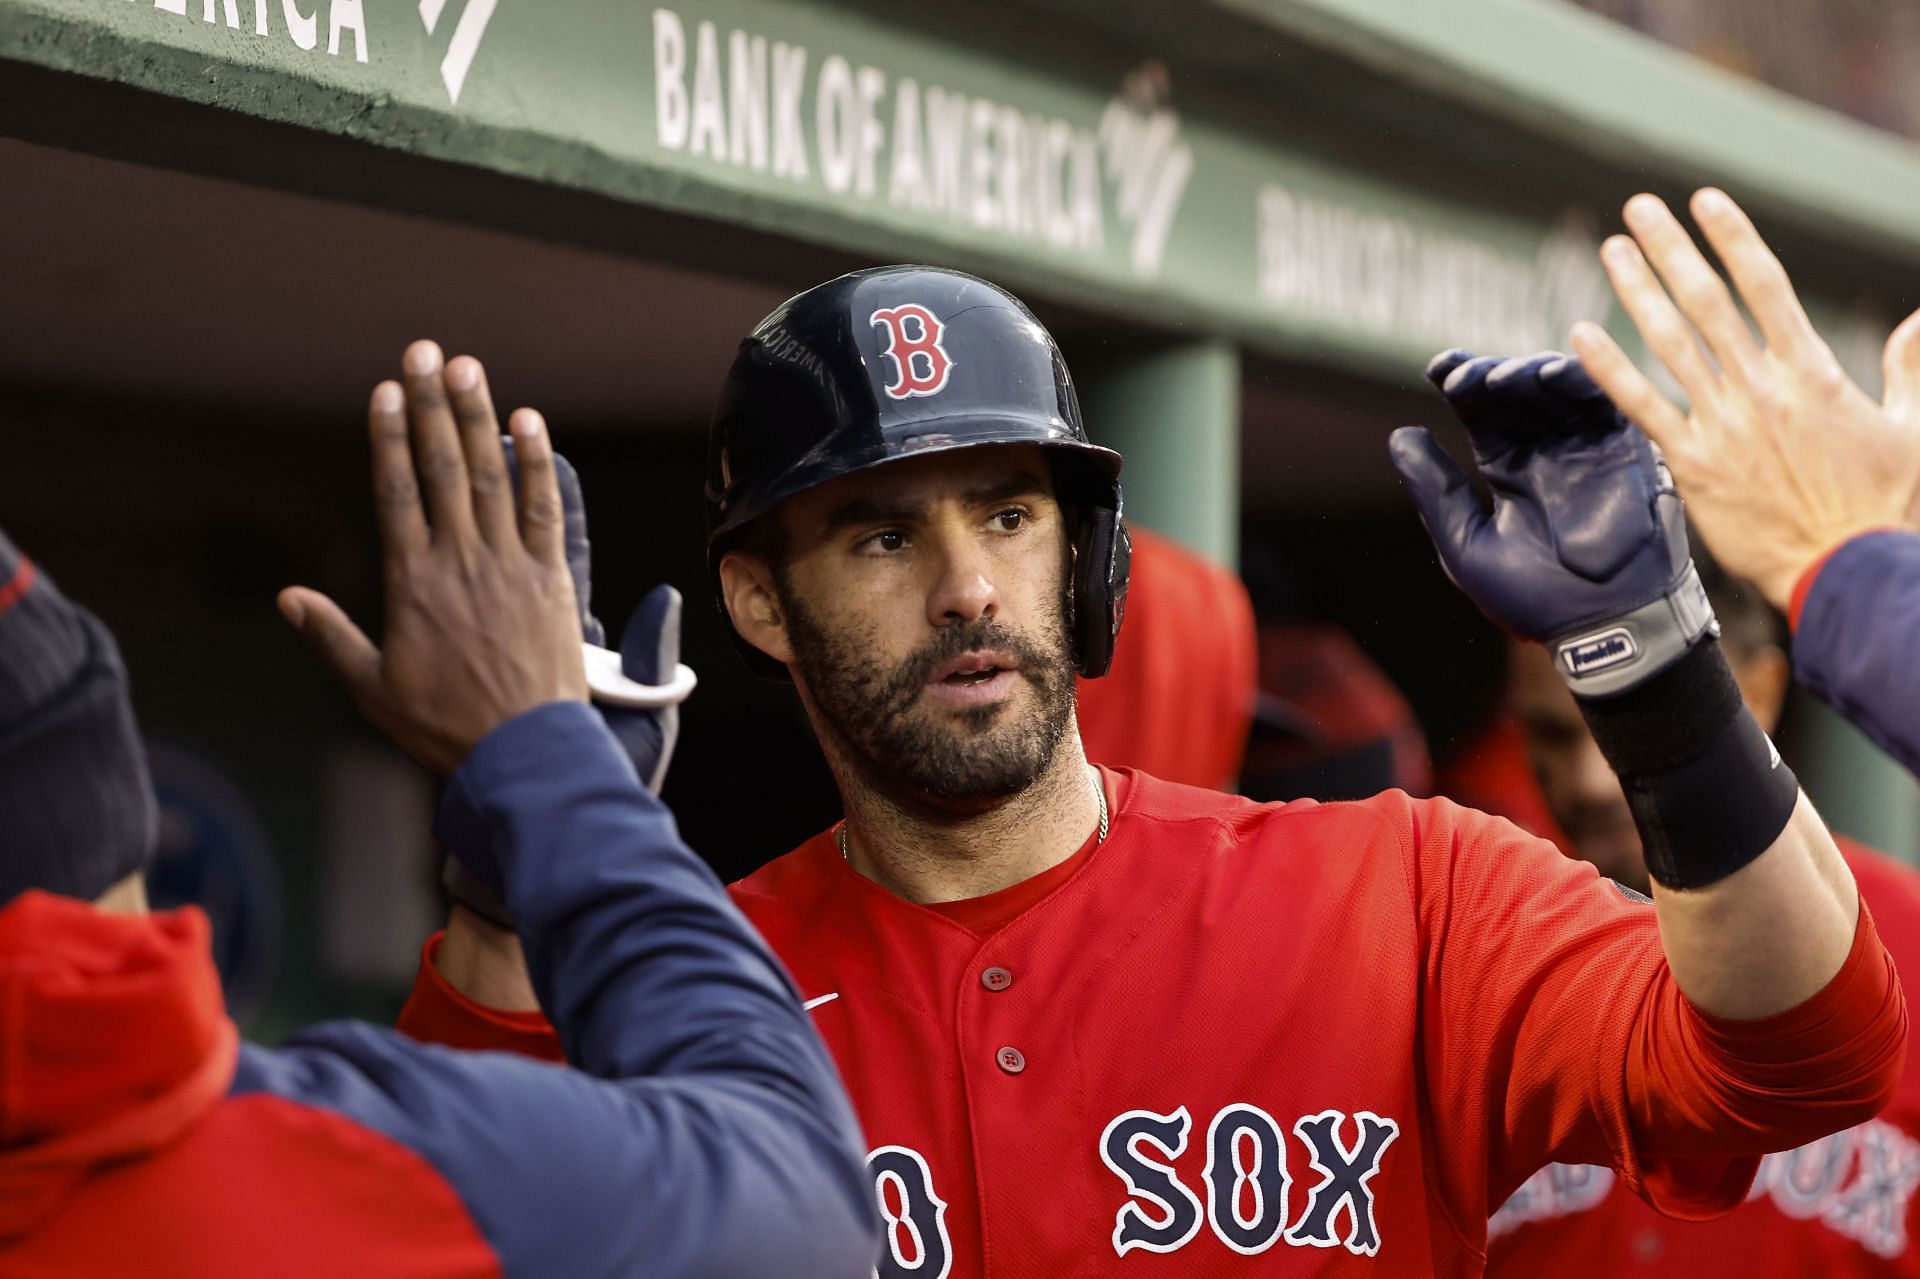 Writer Predicts Familiar Dodgers Coach May Get J.D. Martinez Back